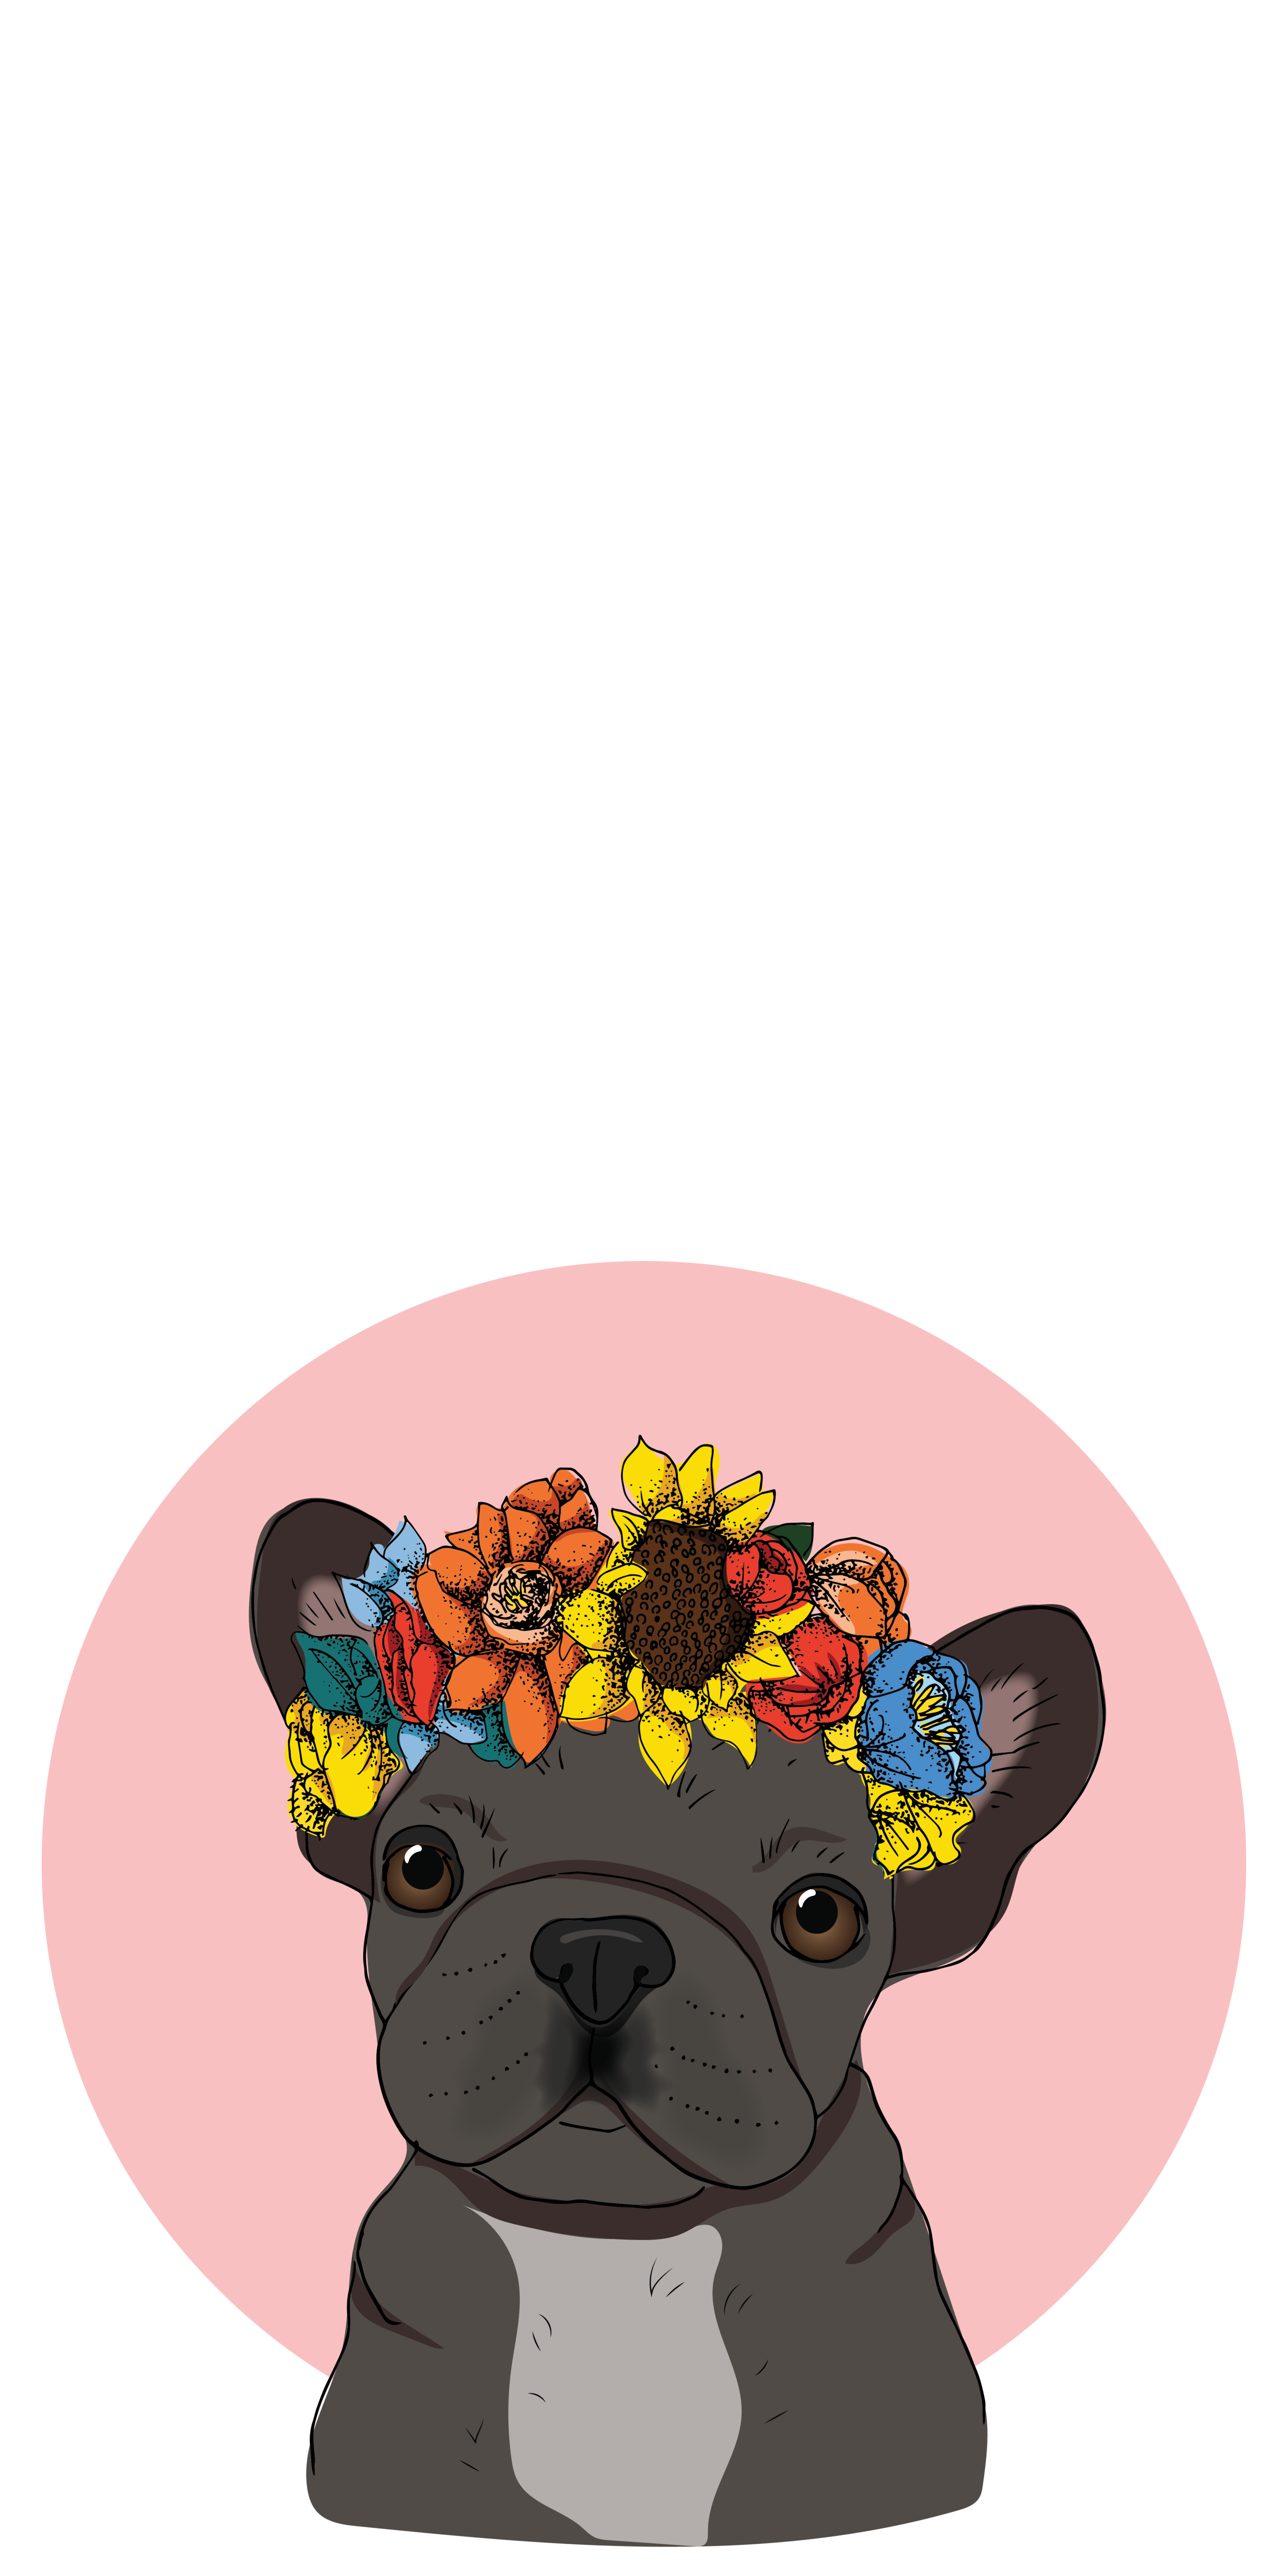 French #Bulldog with #Floral #Crown. #Casetify #iPhone #Art #Design #Cool # Wallpaper #Animals. Bulldog wallpaper, Dog wallpaper iphone, French bulldog wallpaper